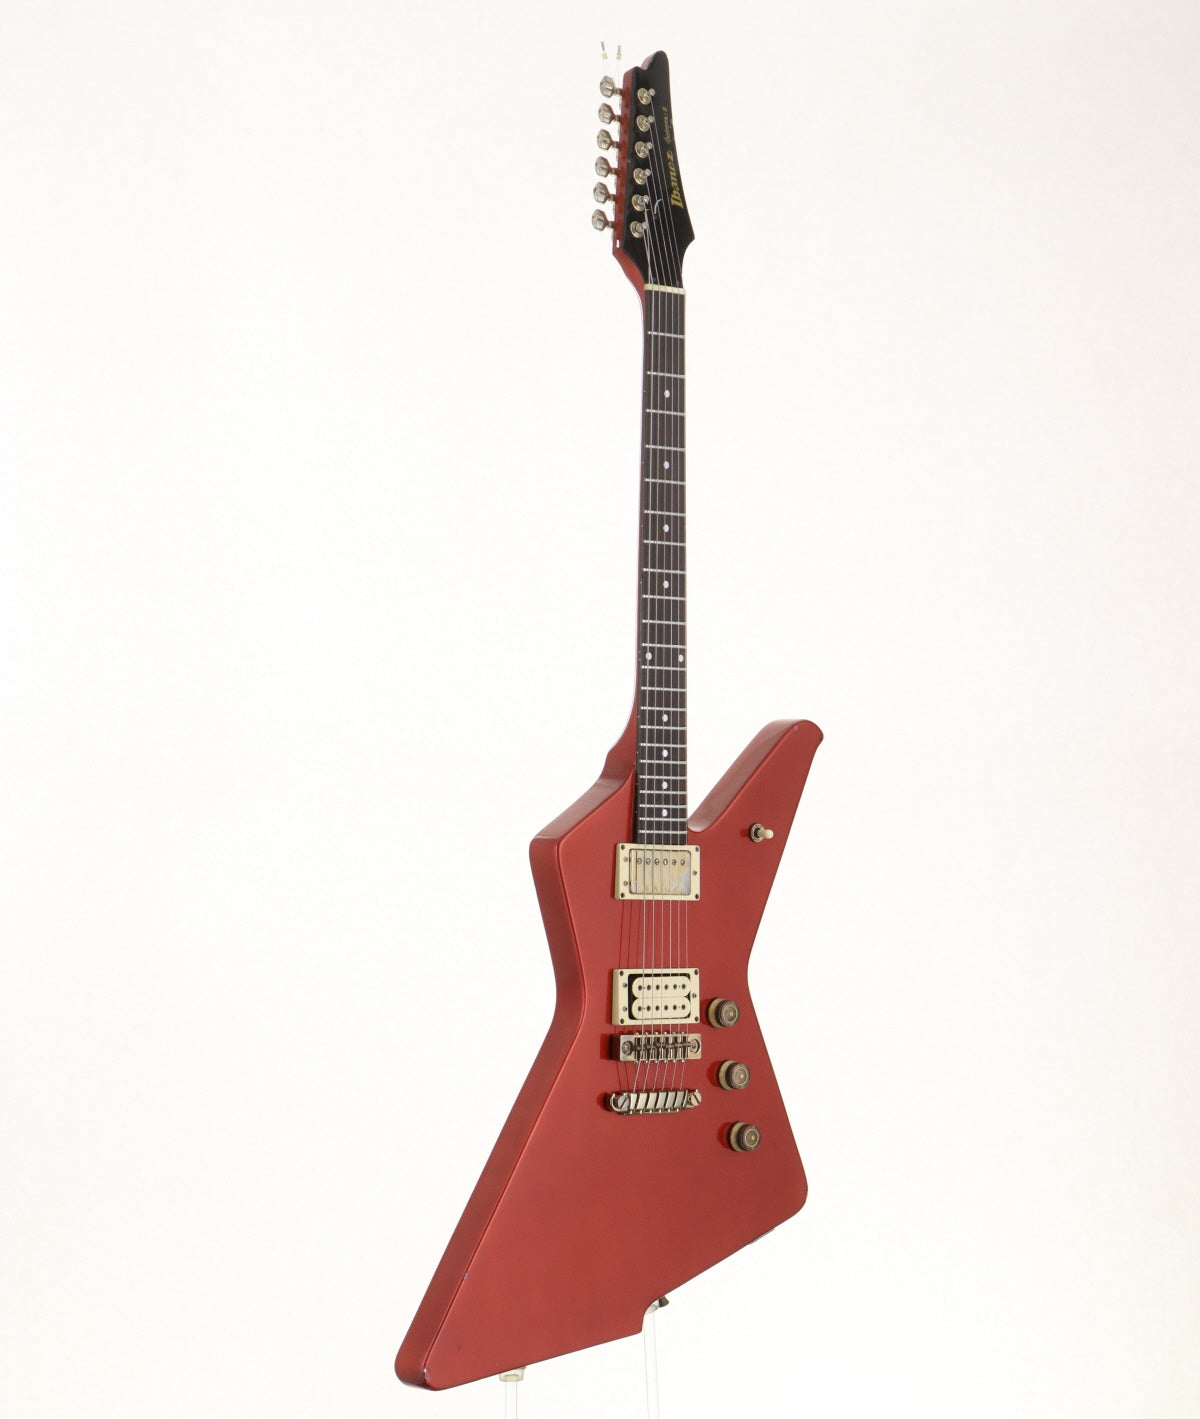 [SN E82476] USED IBANEZ / DT300 Fire Red [03]